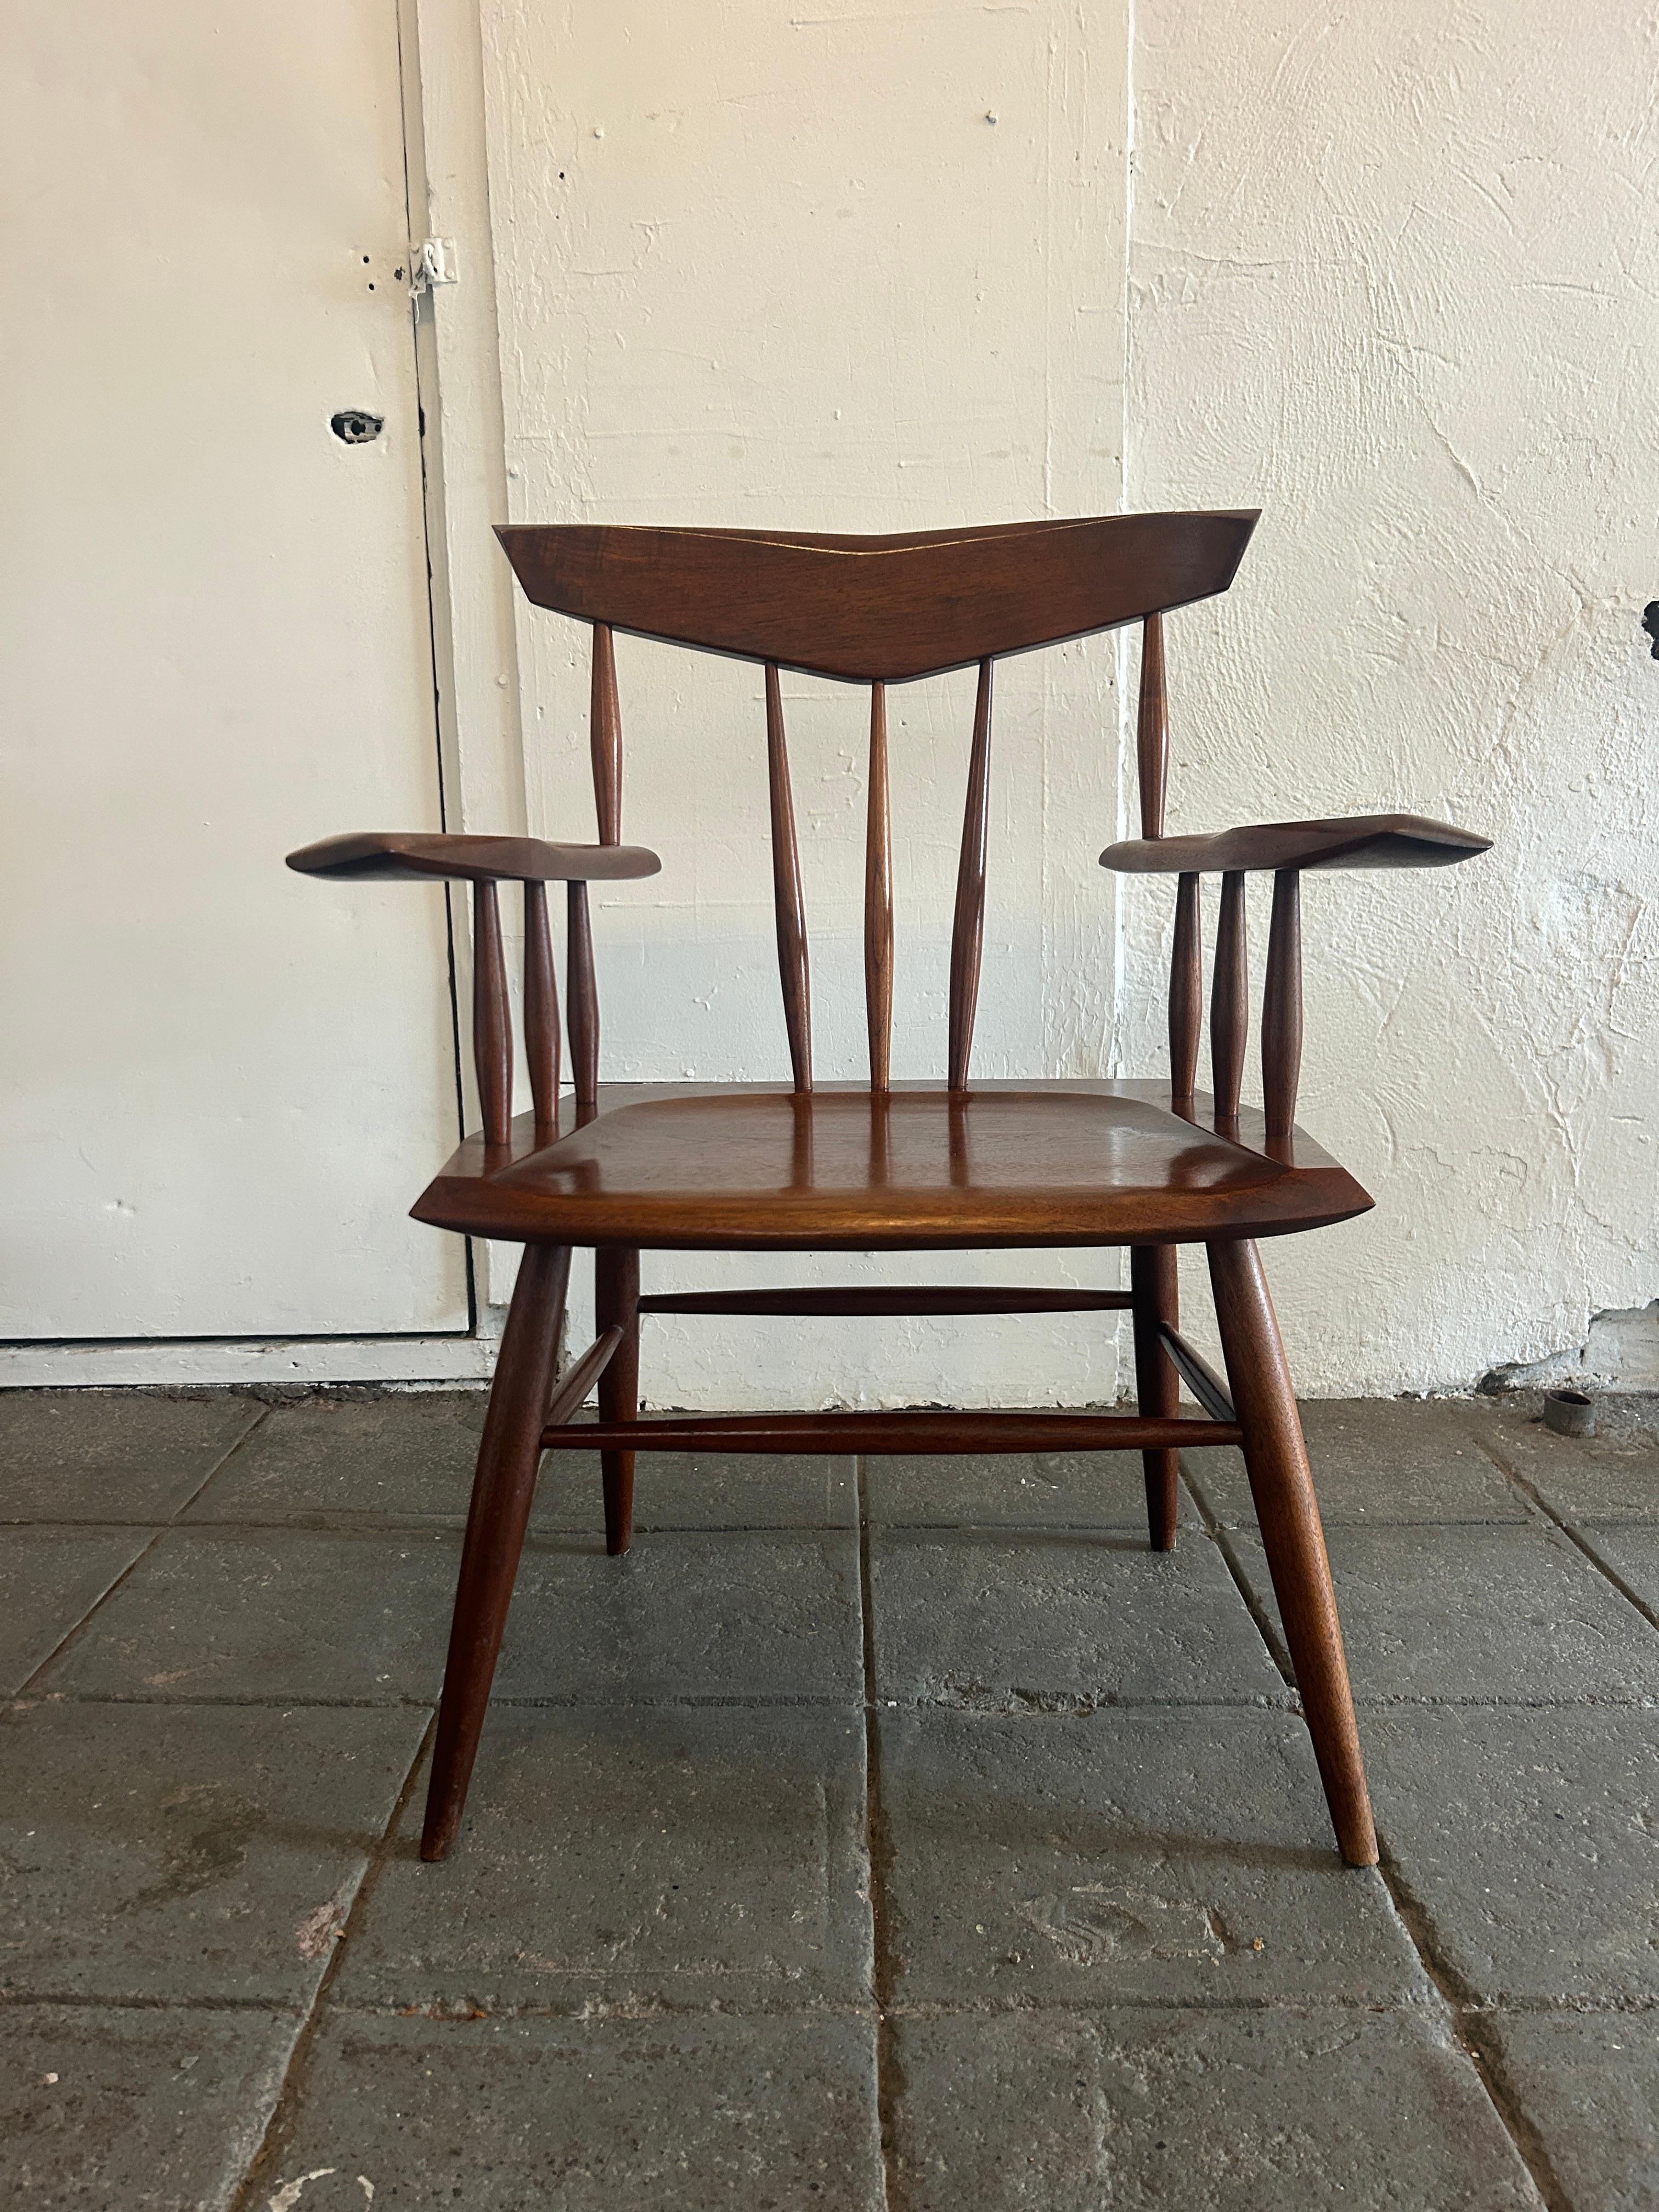 Rare Mid Century Studio Craft Sculptural Walnut Arm Chair by James Martin. Handmade in the USA - New Hope, PA. All Solid American black walnut wood. James Martin worked with George Nakashima / Studio prior to doing his own woodworking in New Hope,